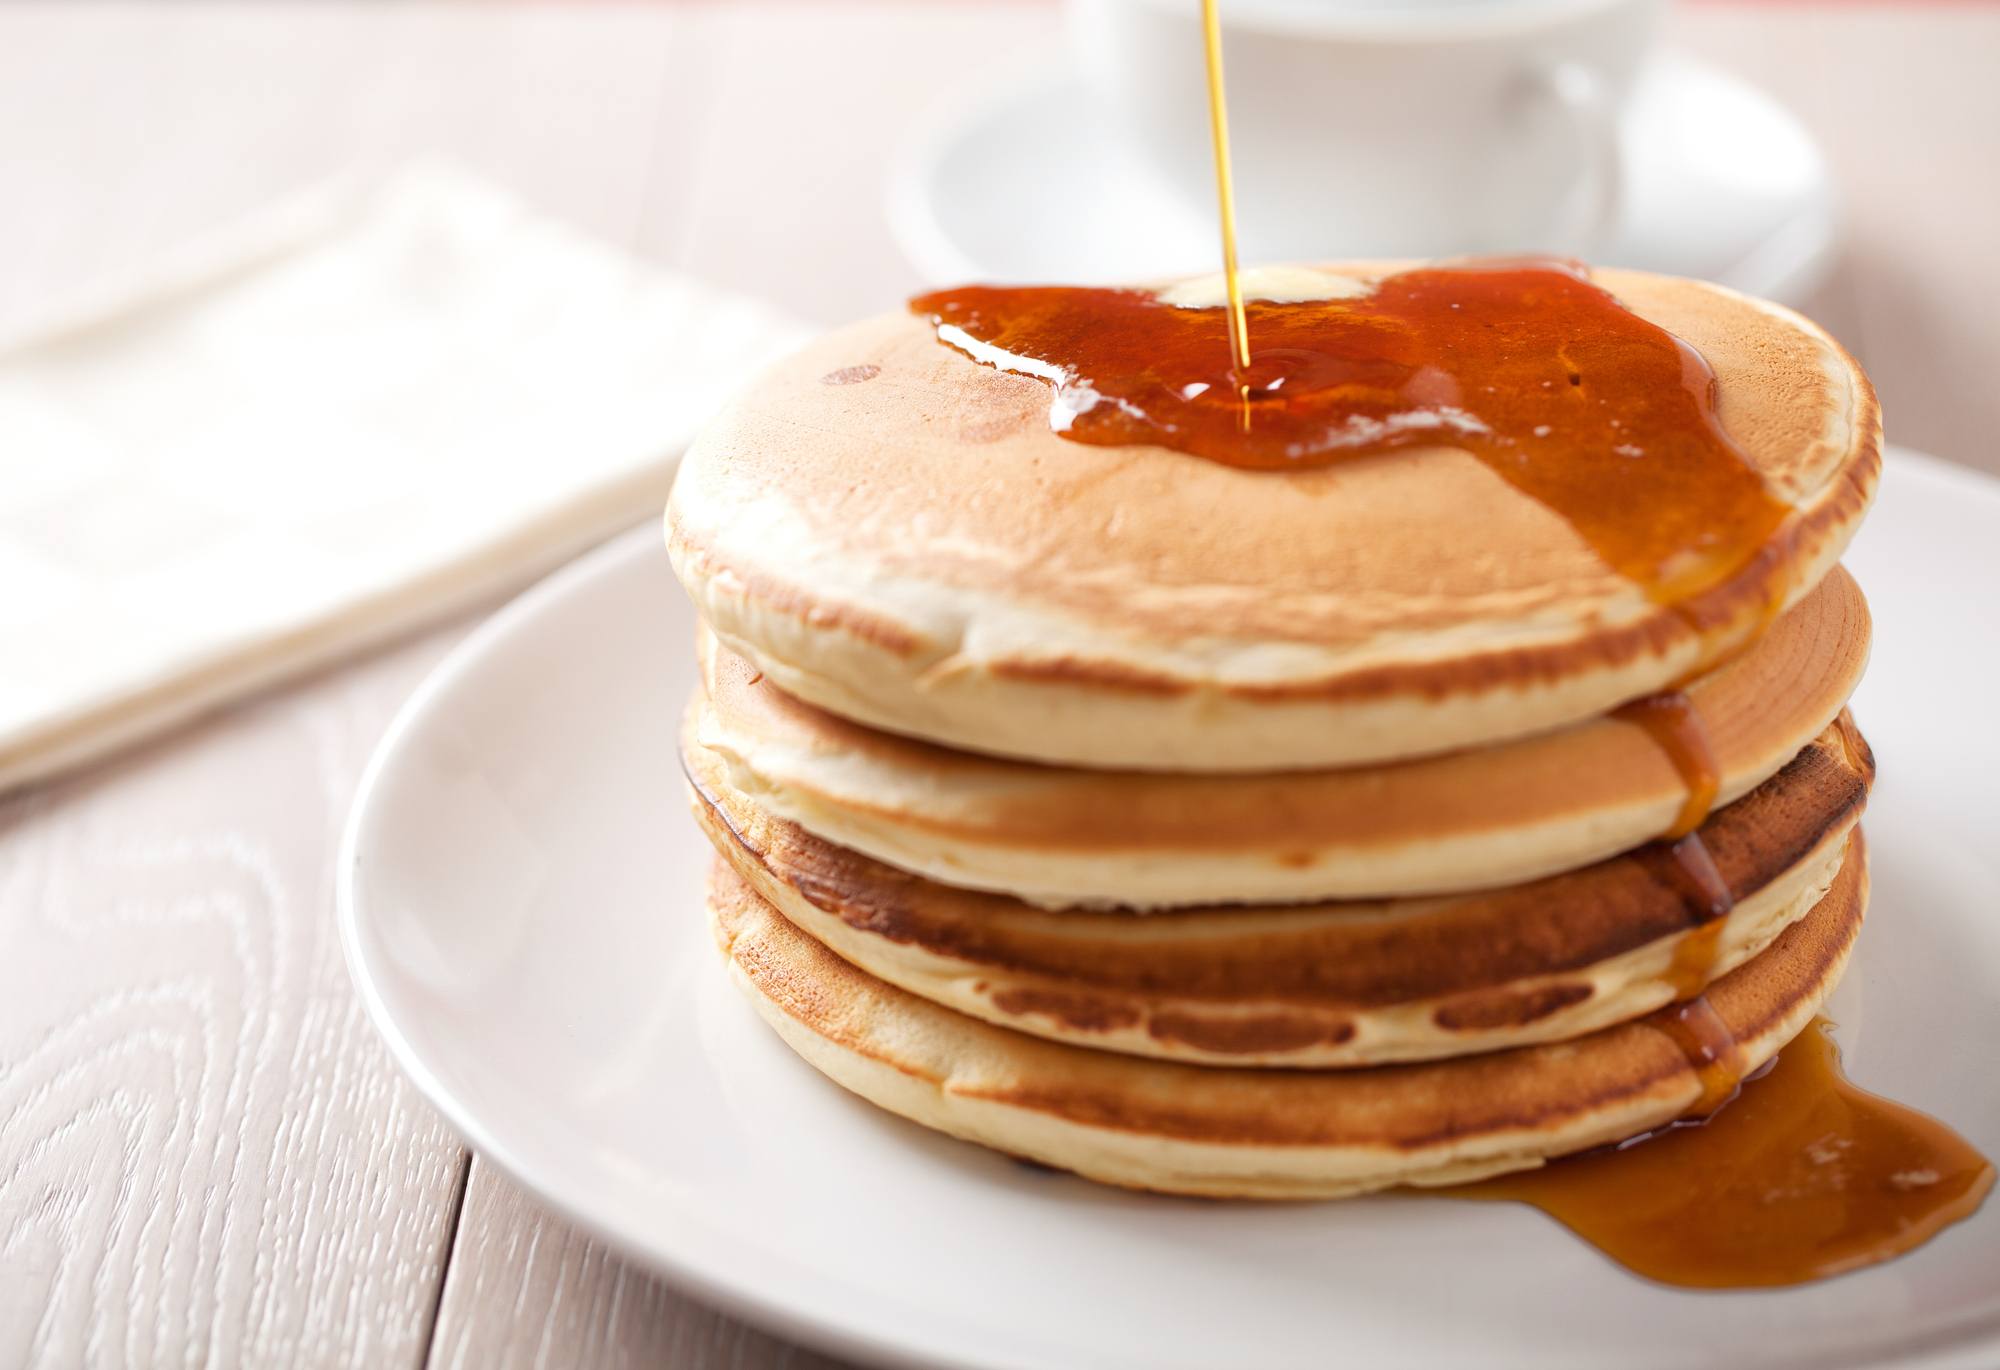 Top off your Canadian maple syrup festival experience with pancakes with lots of maple syrup